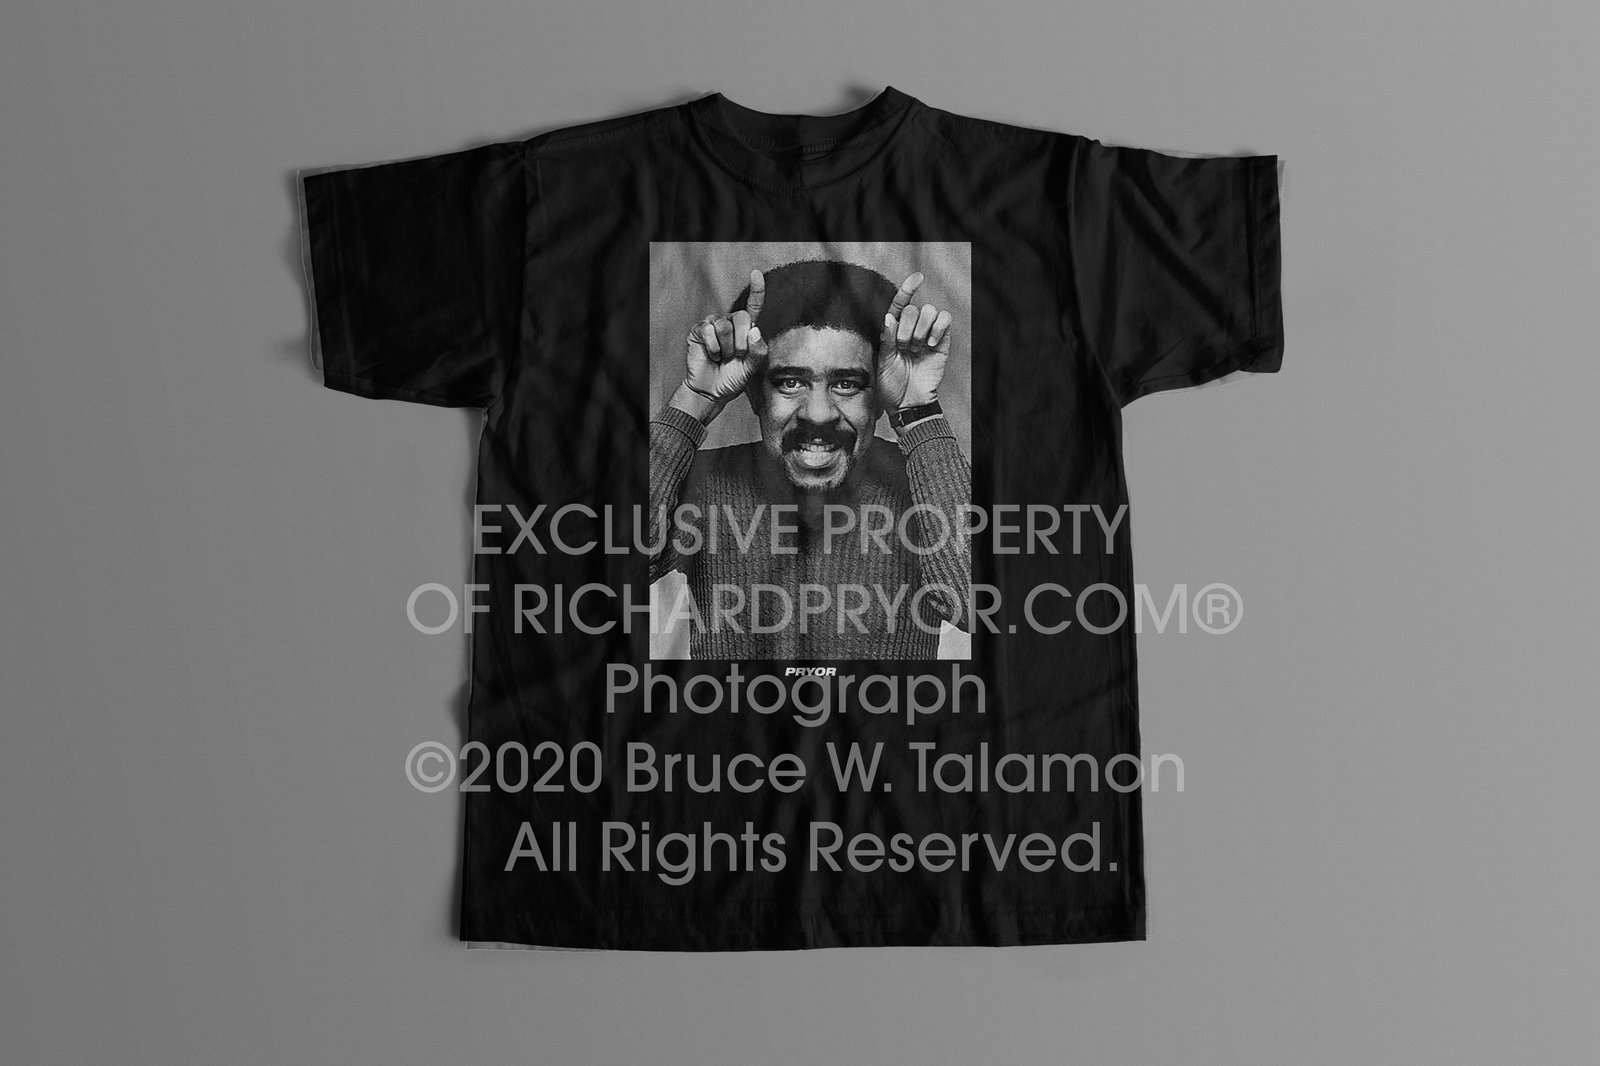 Official Richard Pryor® Horns Tee. Trademark Protected Content.